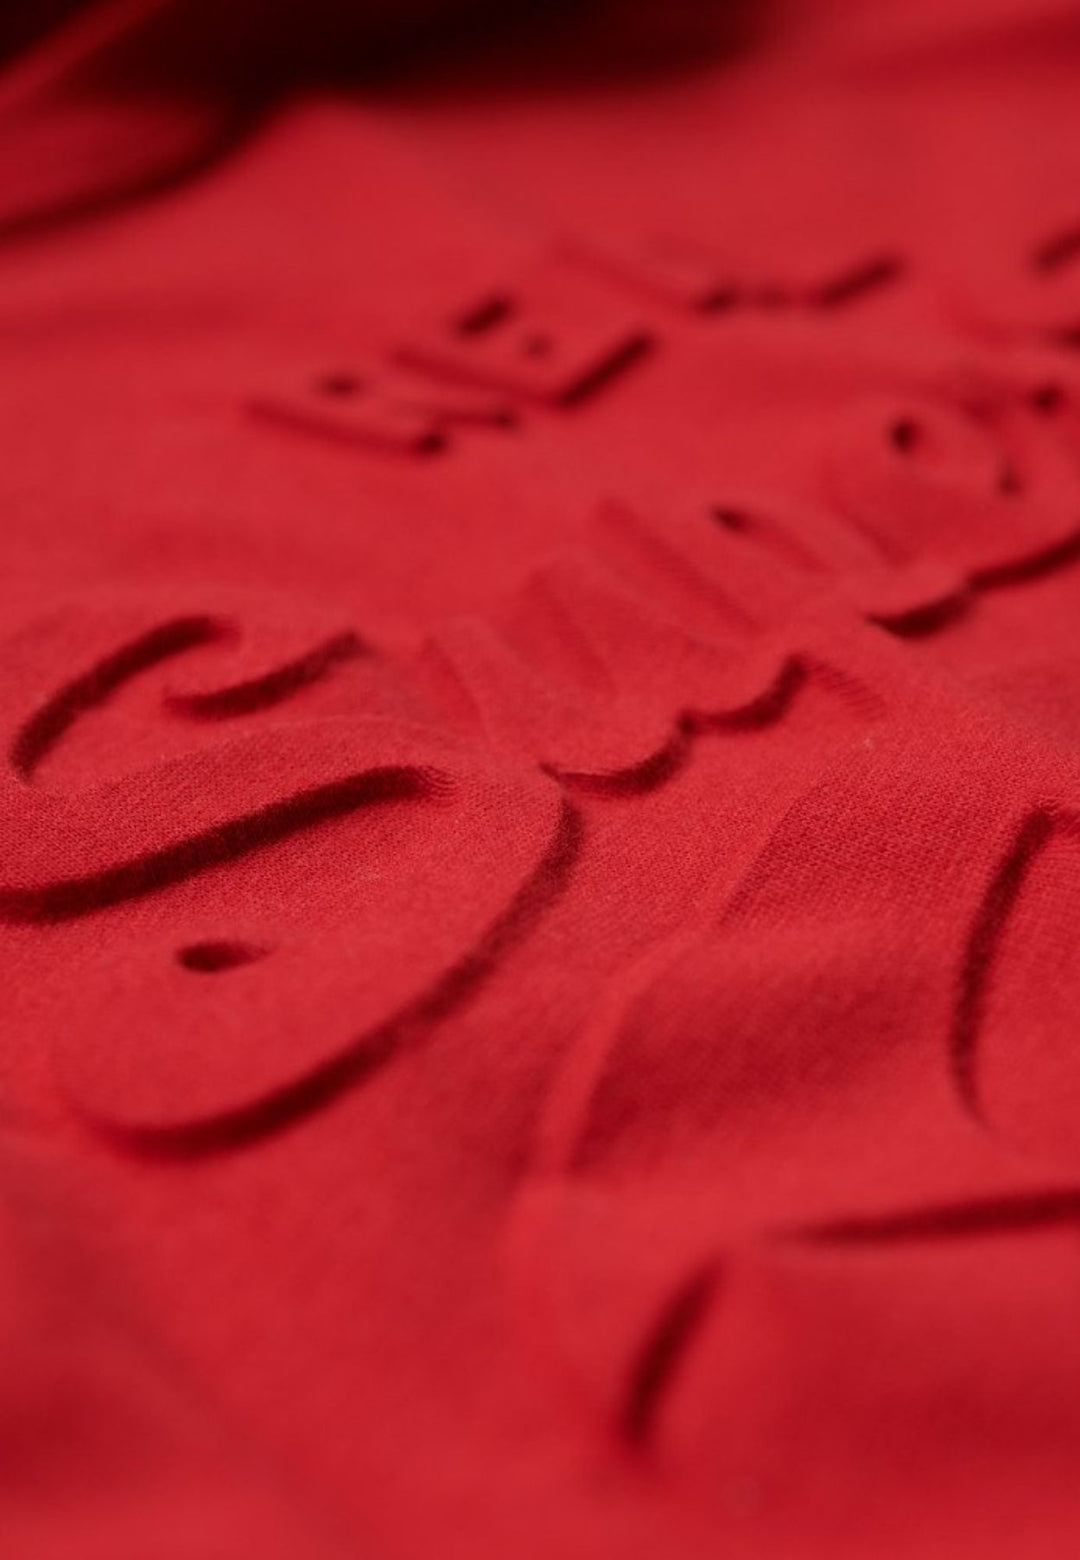 Superdry Embossed Vintage Logo T-Shirt | Expedition Red